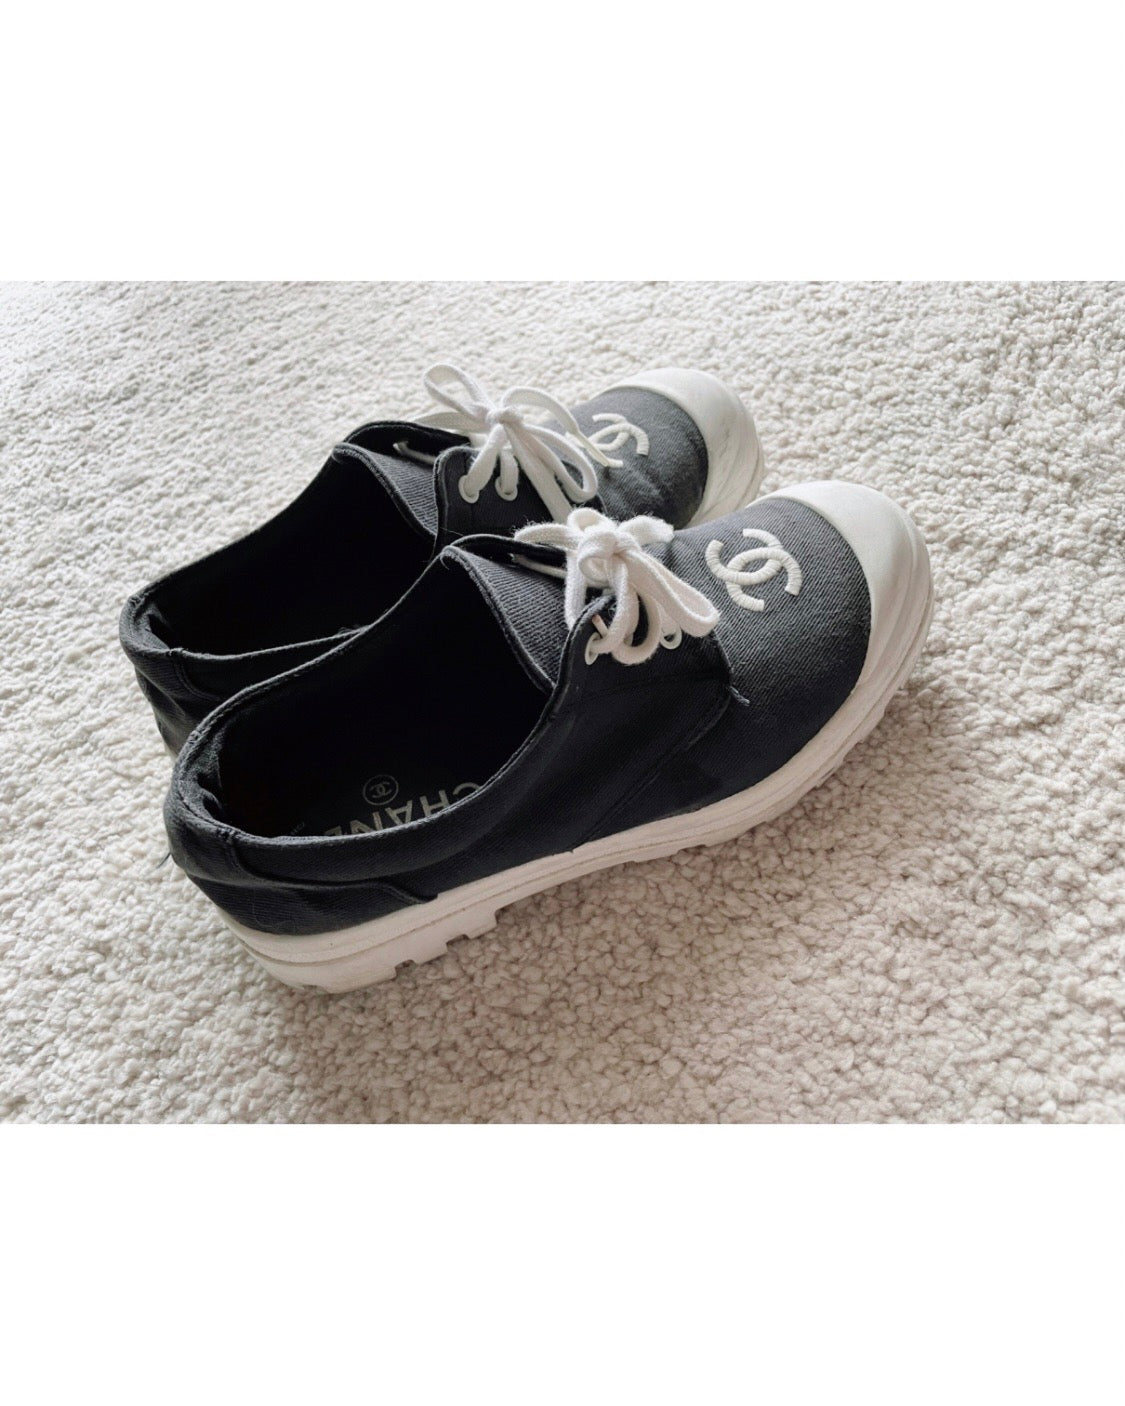 CHANEL CC Logos Bi-color Sneakers Shoes 雙C Logo 凡布鞋 - STAY PURE